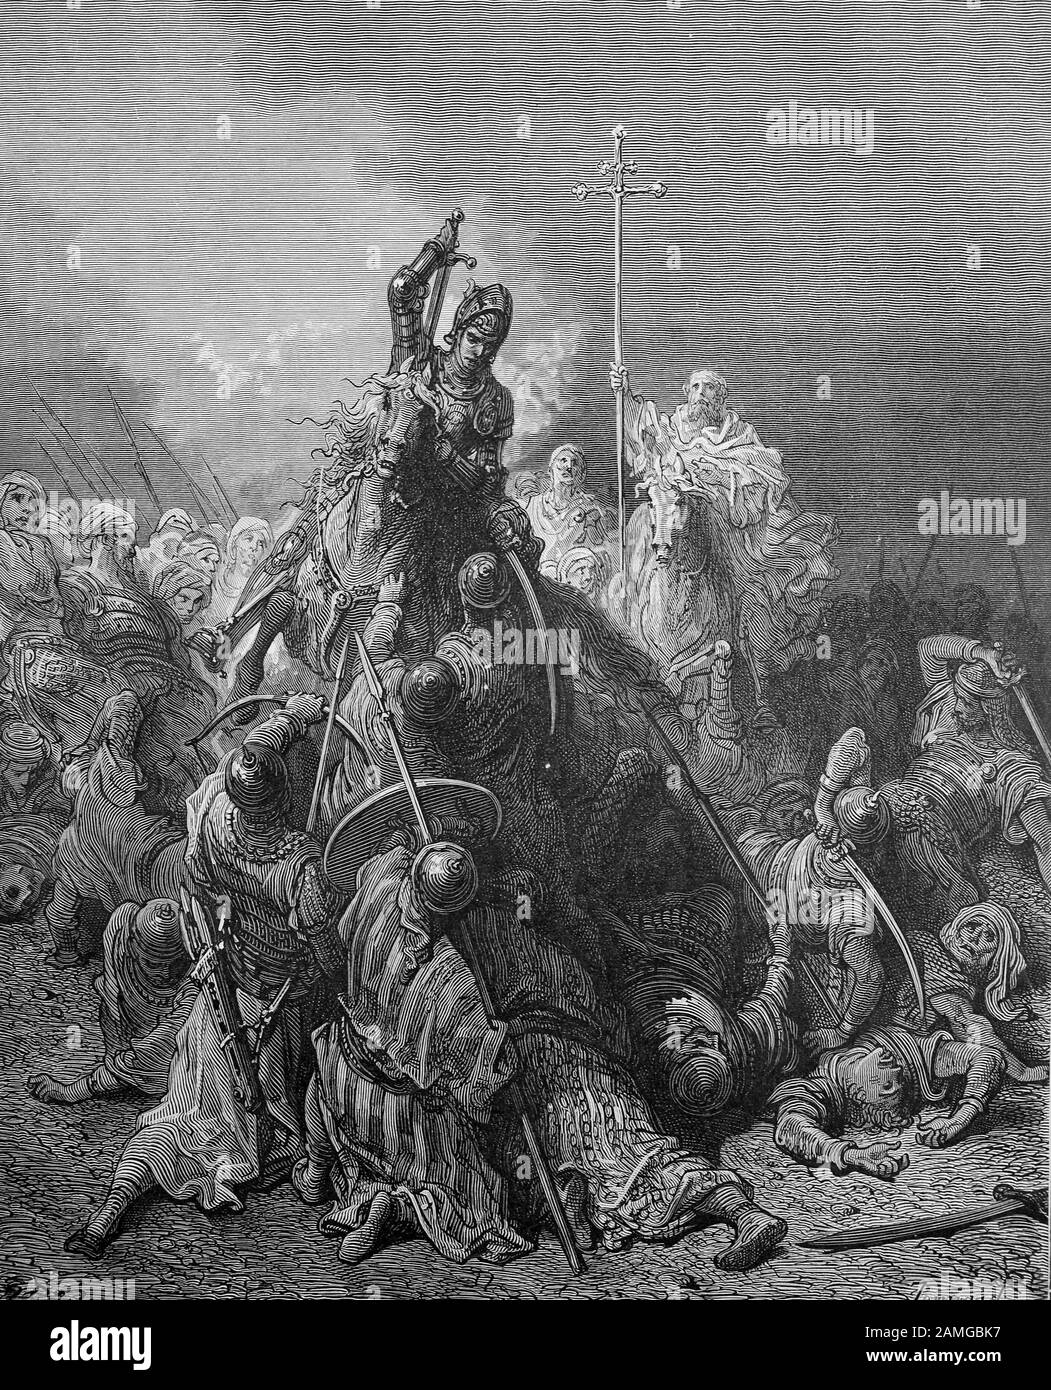 The crusades were a series of religious wars in western Asia and Europe initiated, supported and sometimes directed by the Catholic Church, the fighting, Johannes Banfi Hunyades und Tapistran beim Kampf, original print from th 19th century, Historisch, digital improved reproduction of an original from the 19th century / digitale Reproduktion einer Originalvorlage aus dem 19. Jahrhundert Stock Photo